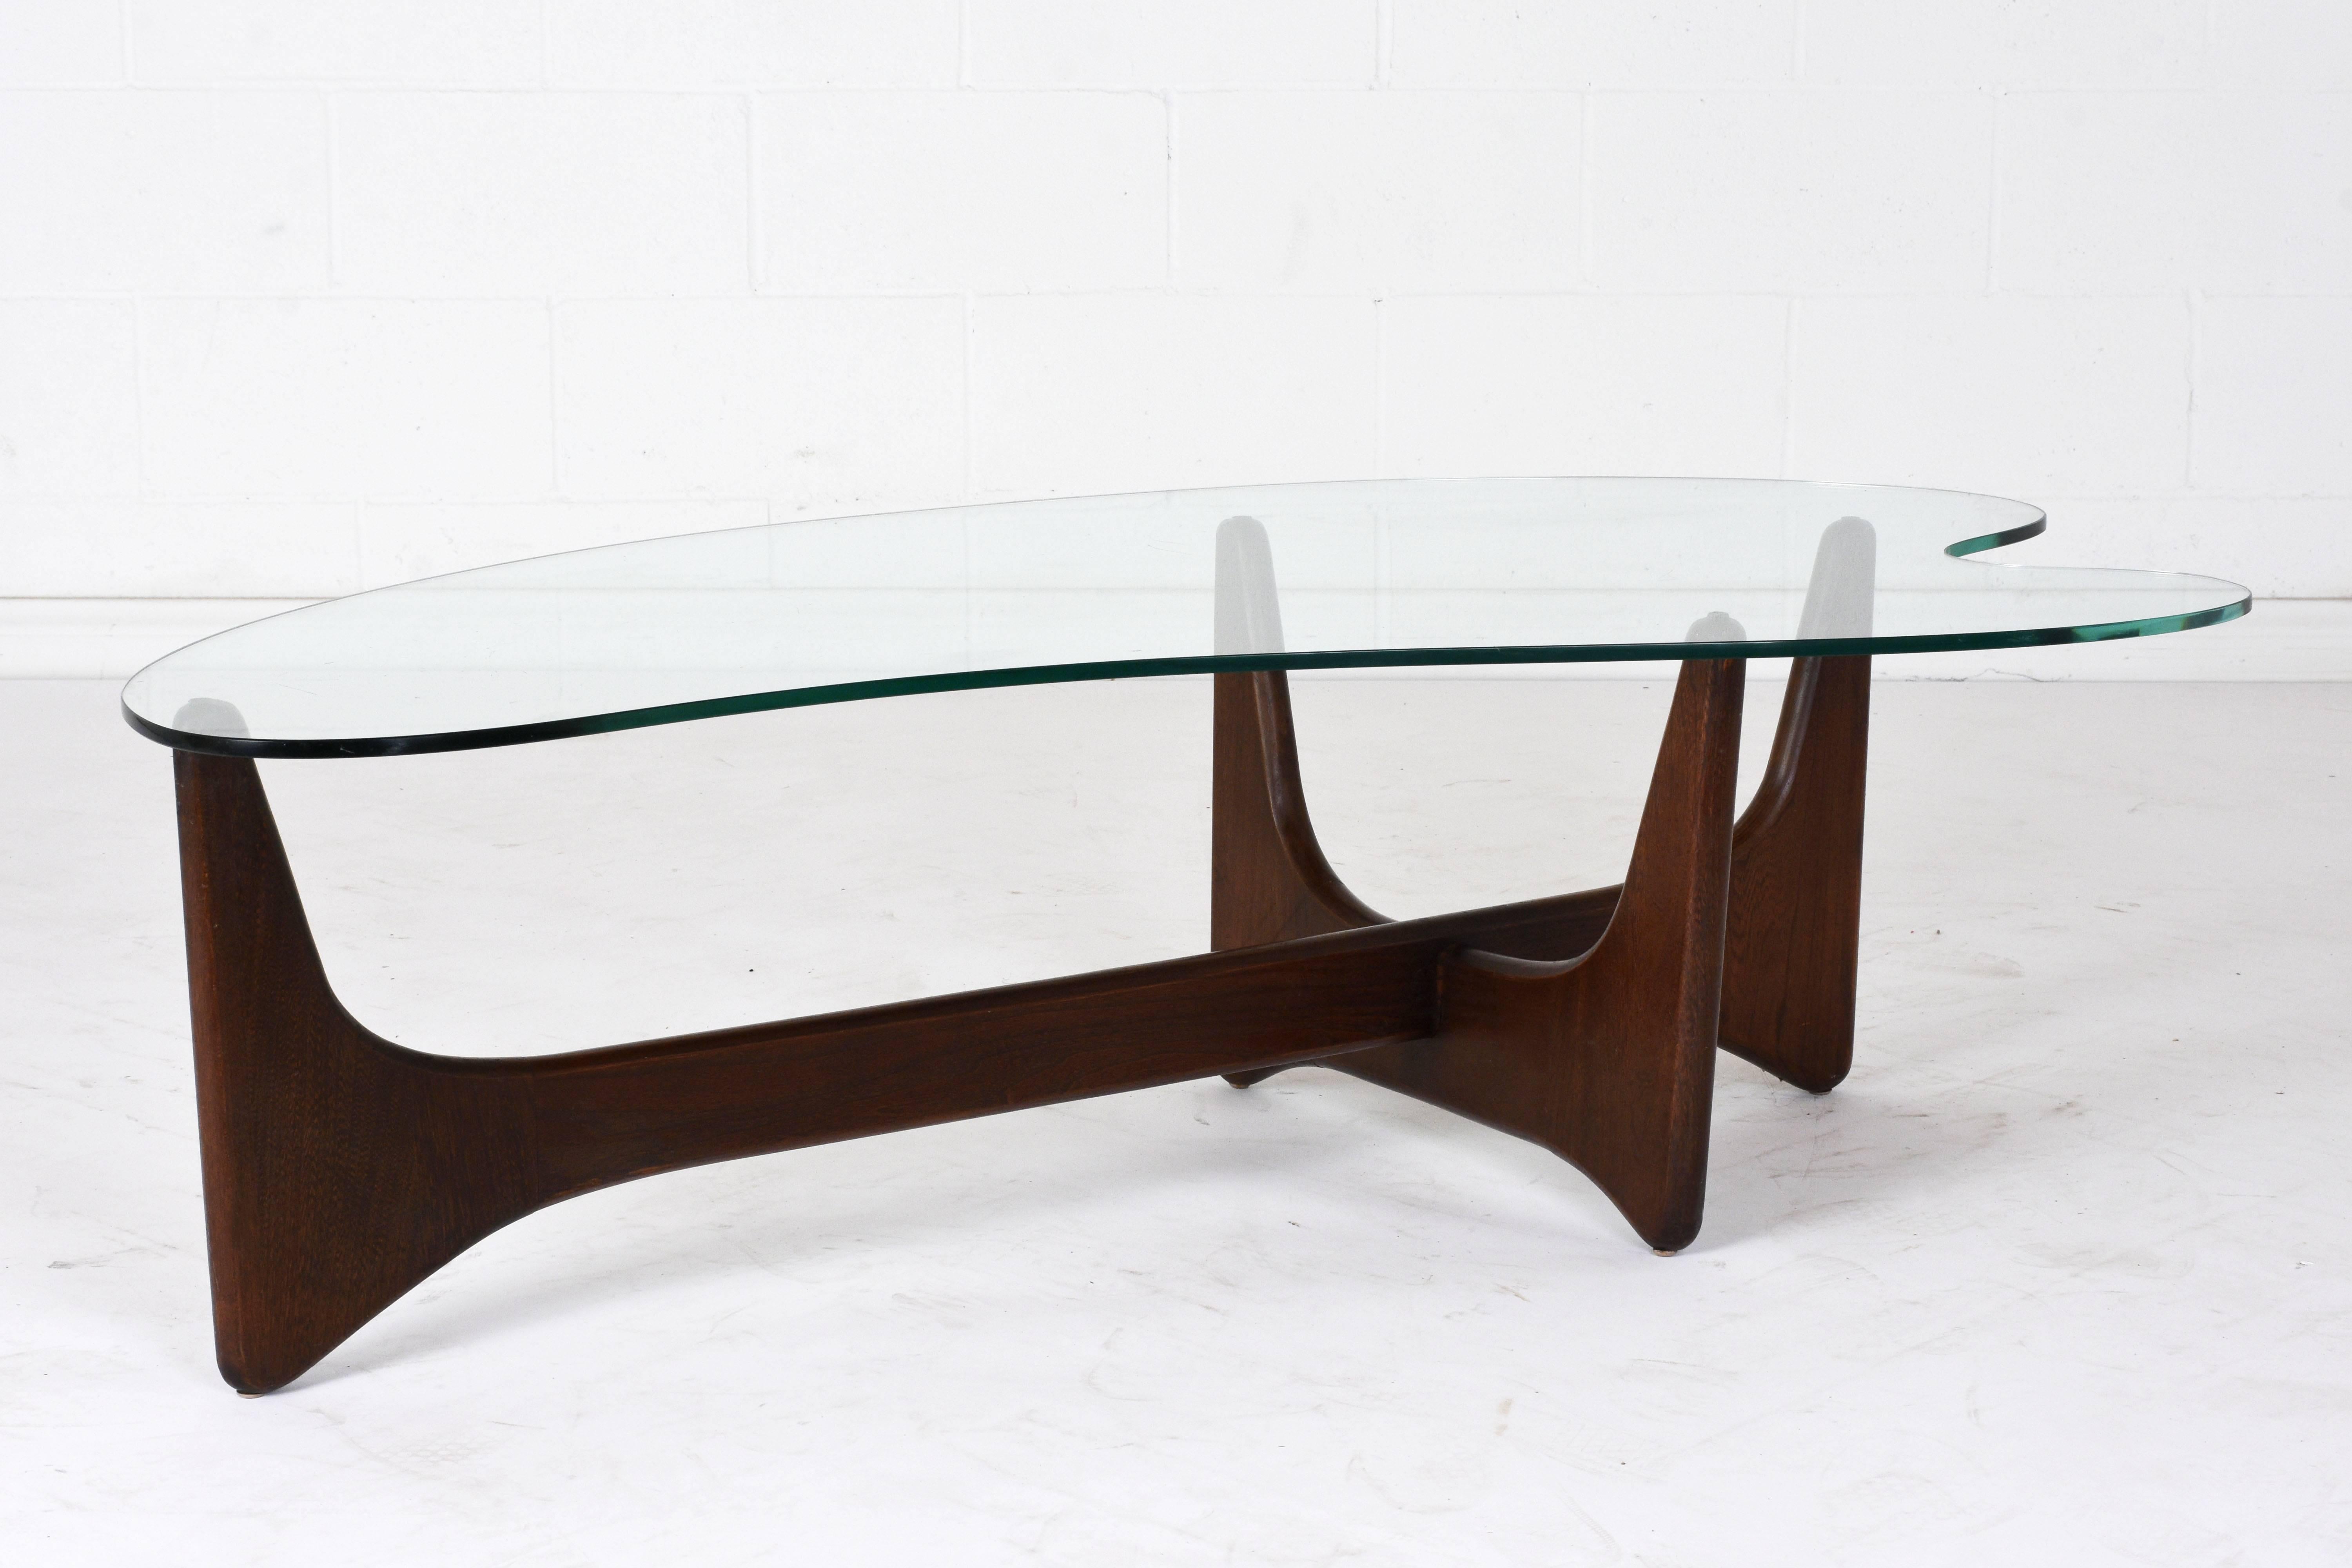 Carved Mid-Century Modern Adrian Pearsall Style Coffee Table